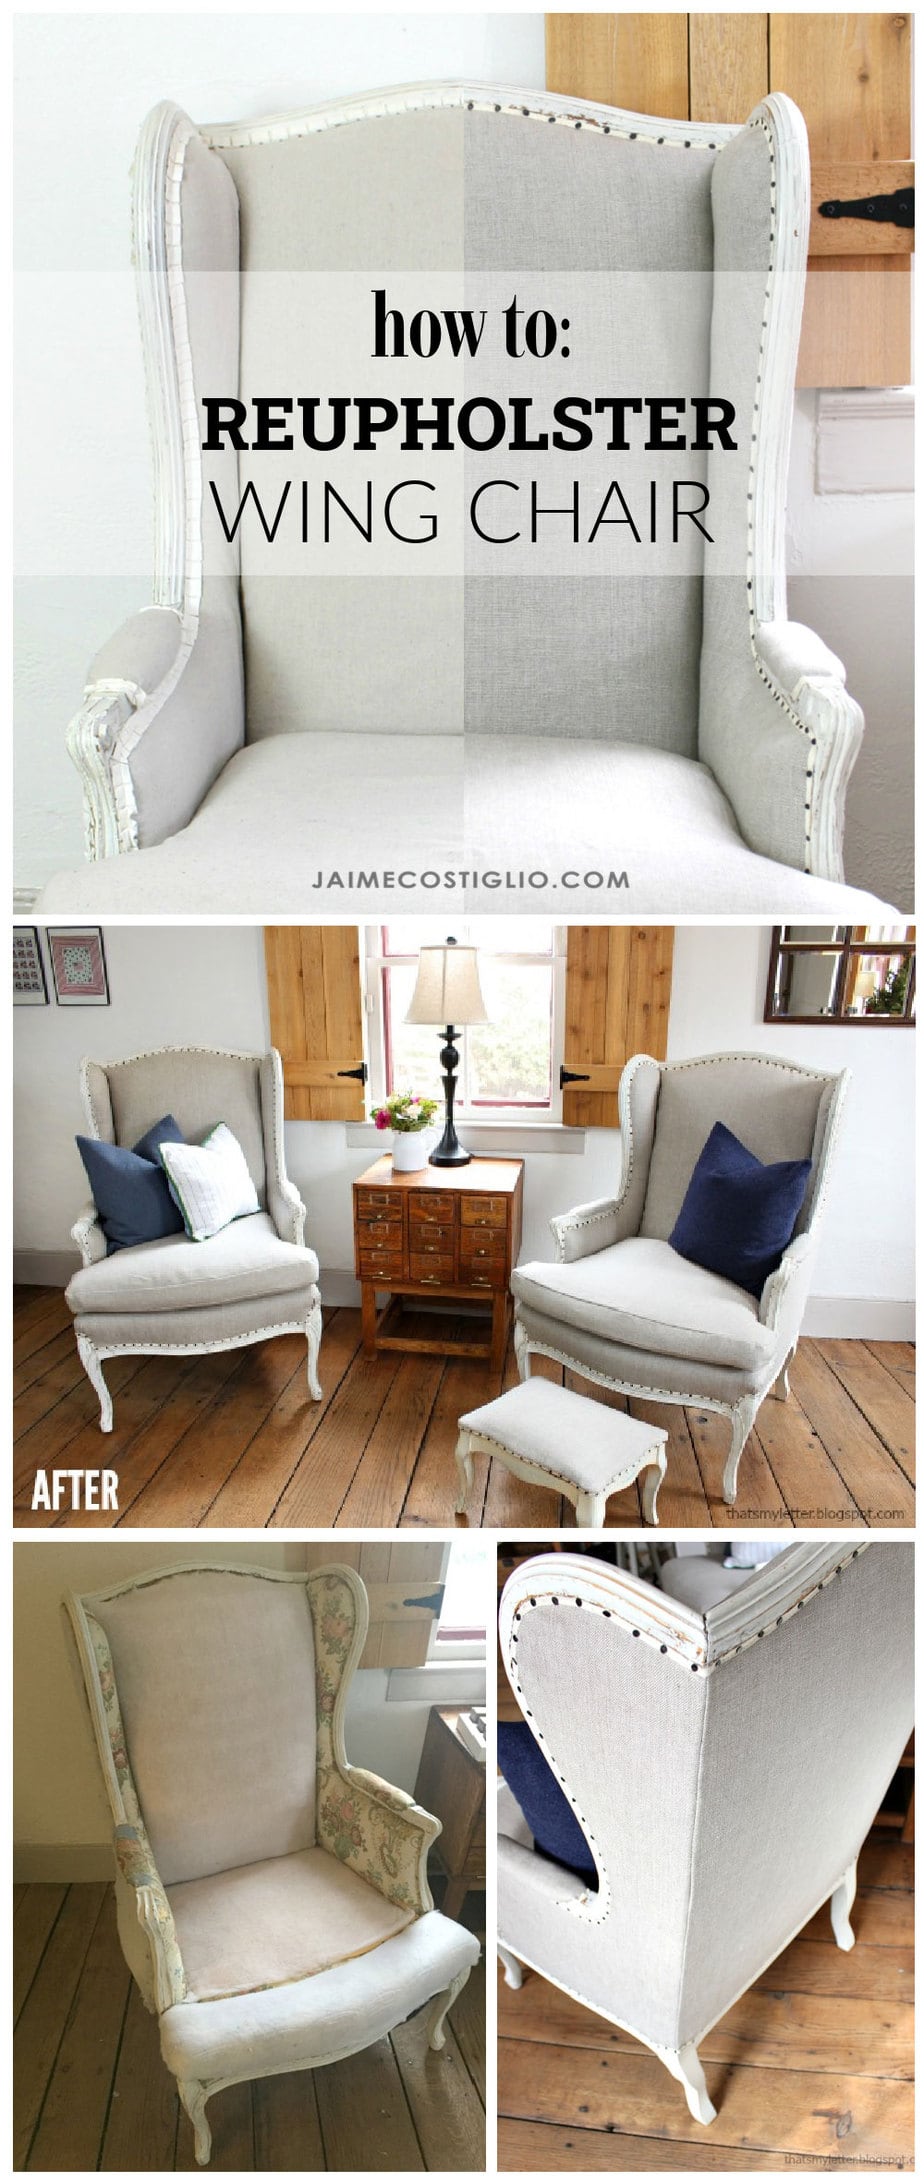 how to reupholster